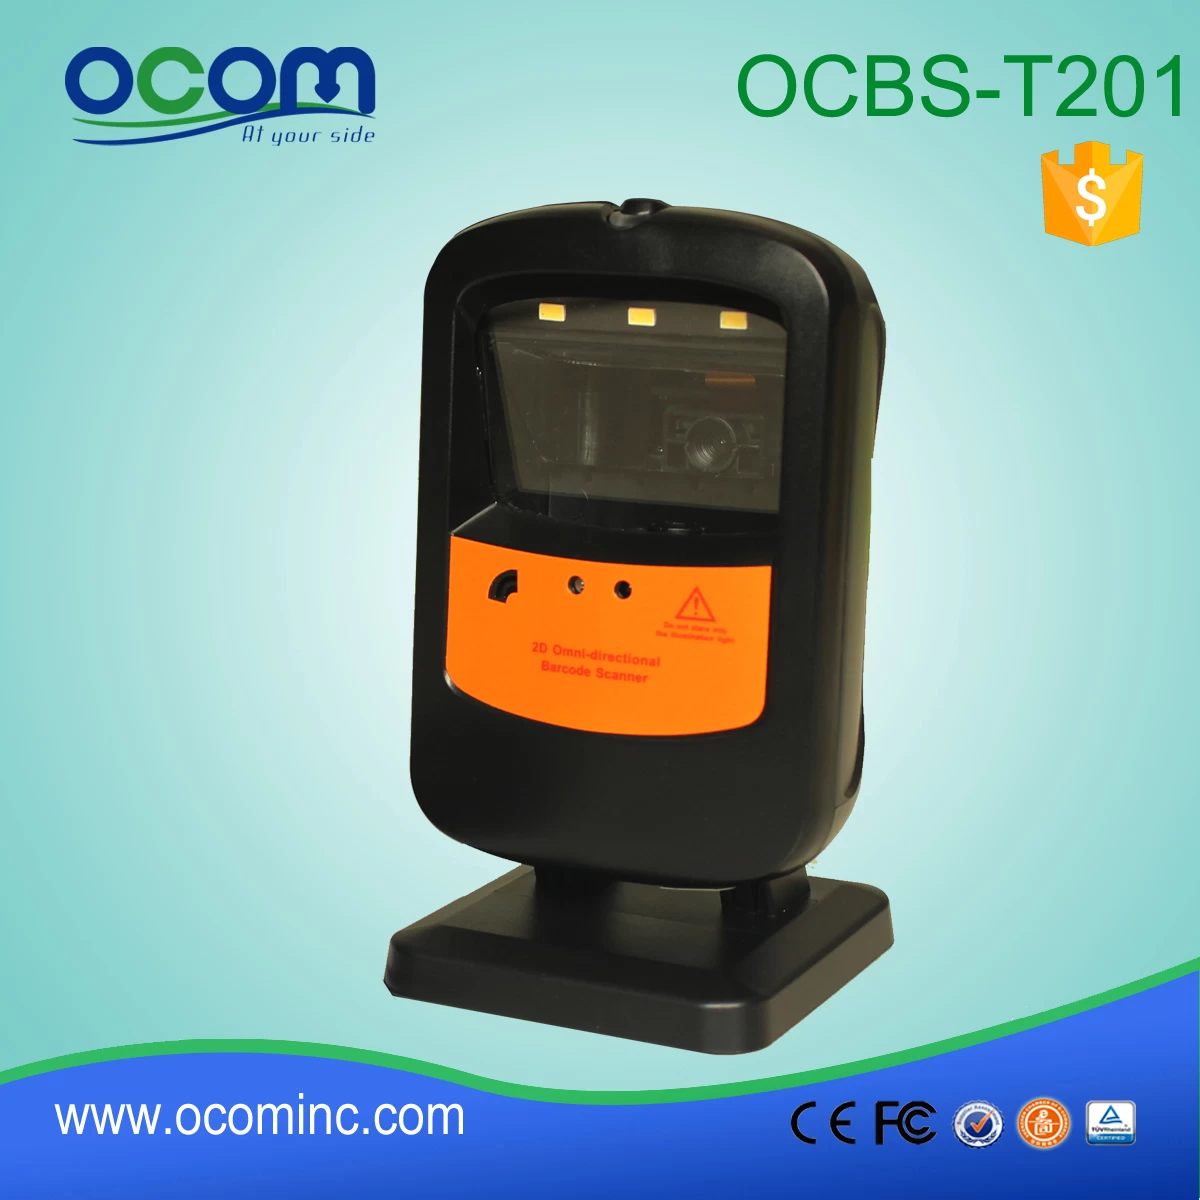 OCBS-T201:table top barcode scanner supplier, small barcode scanner